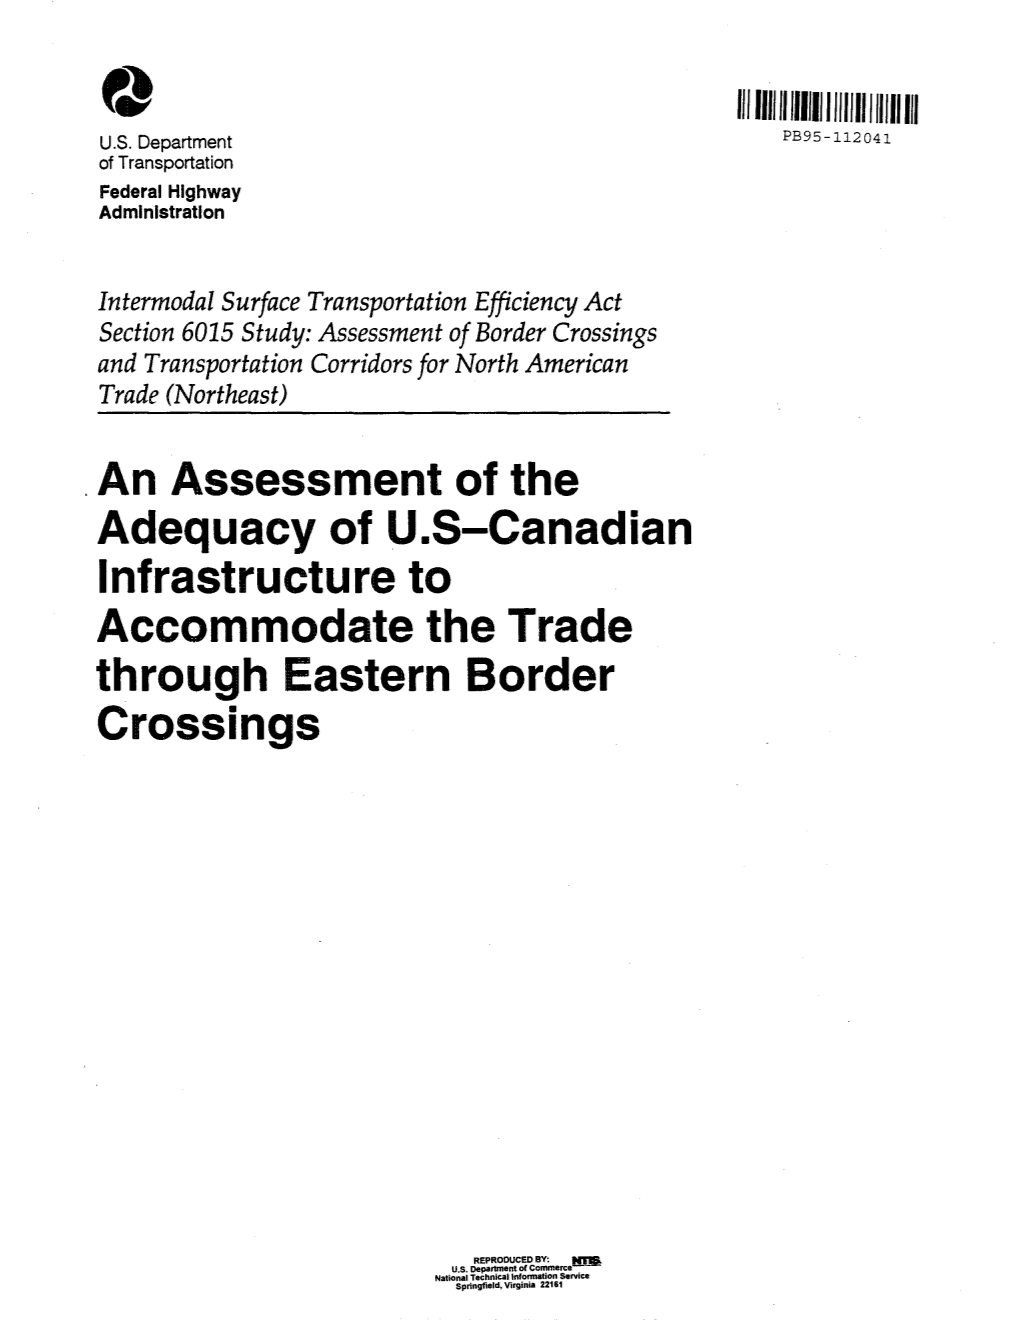 An Assessment of the Adequacy of US-Canadian Infrastructure to Accommodate the Trade Through Eastern Border Crossings